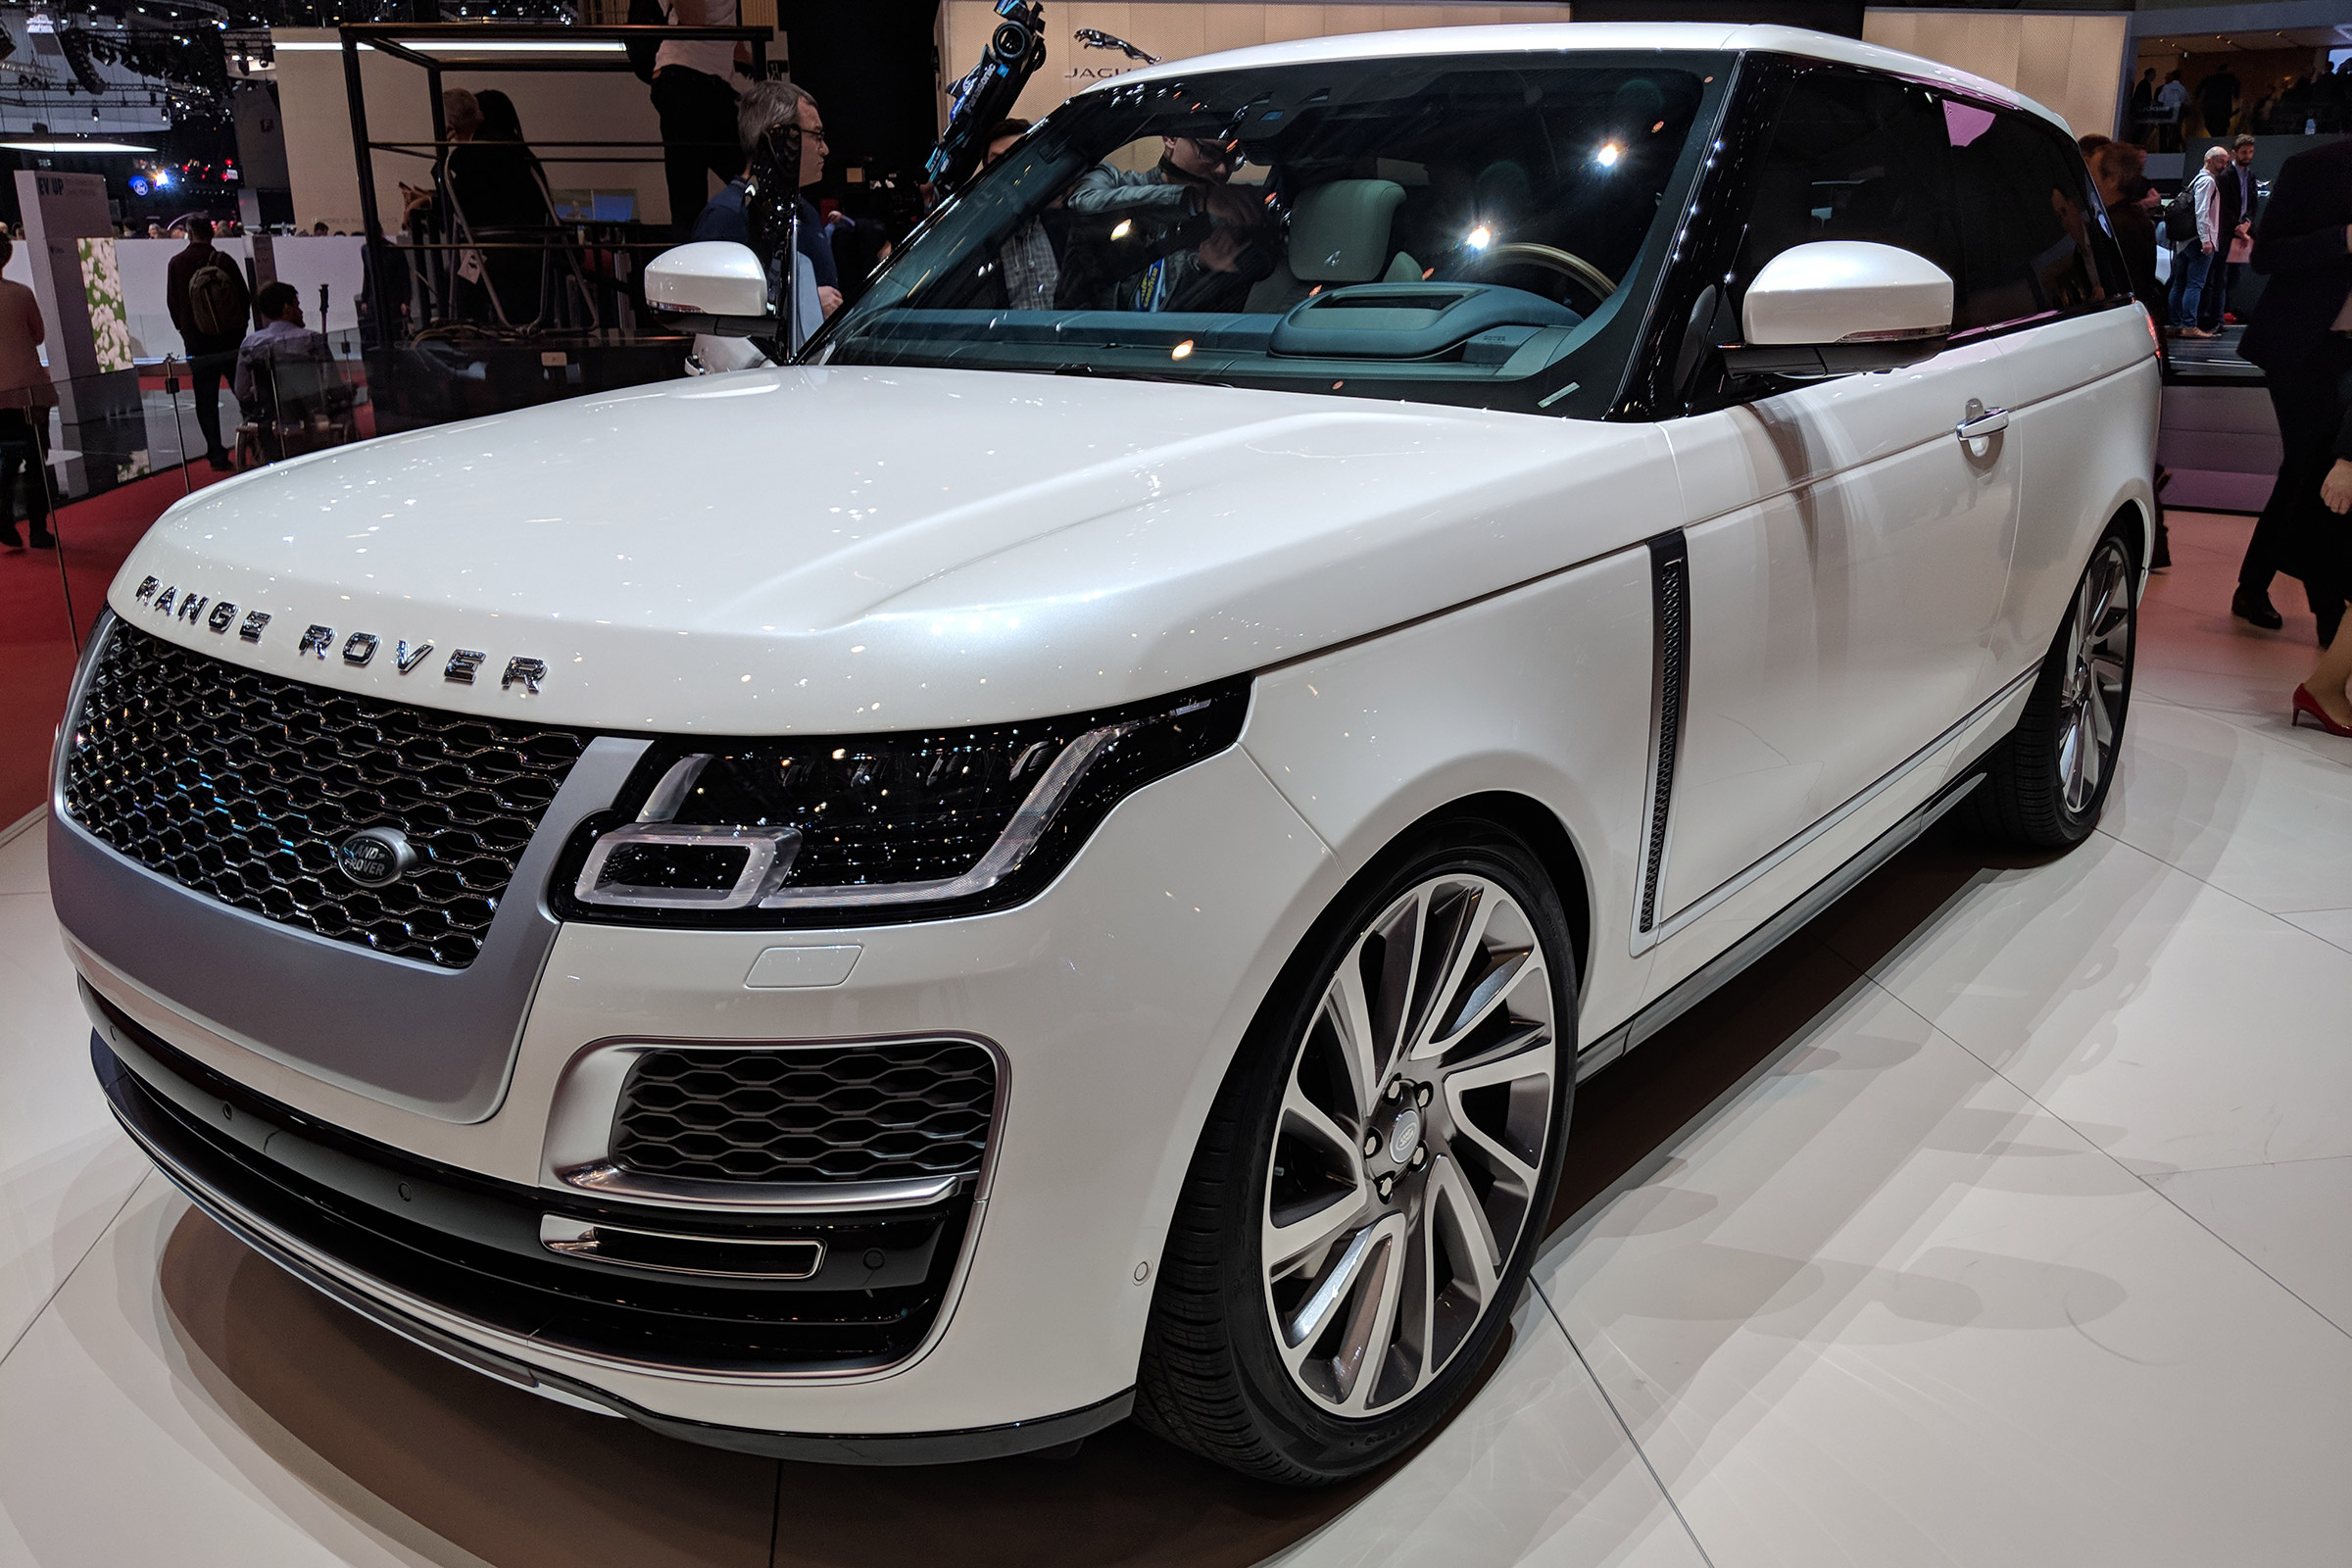 Luxury two-door Range Rover SV Coupe axed  Auto Express